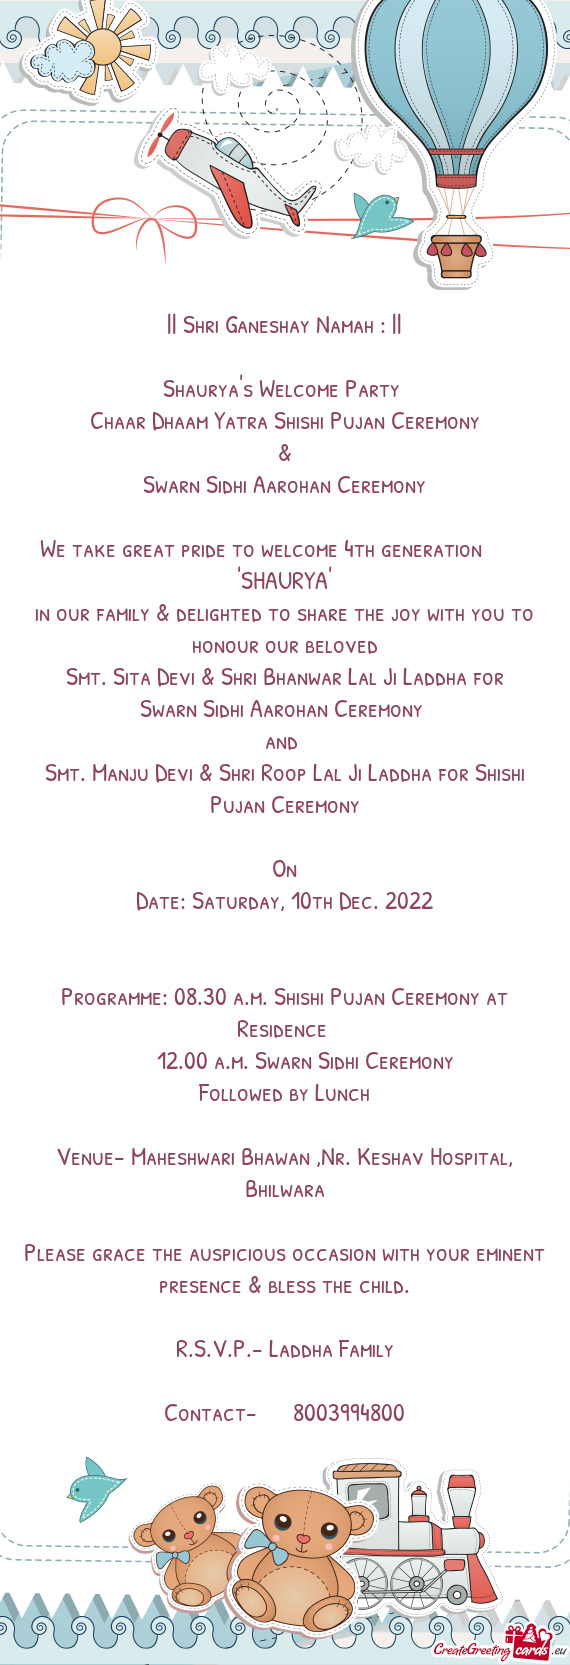 We take great pride to welcome 4th generation   "SHAURYA"